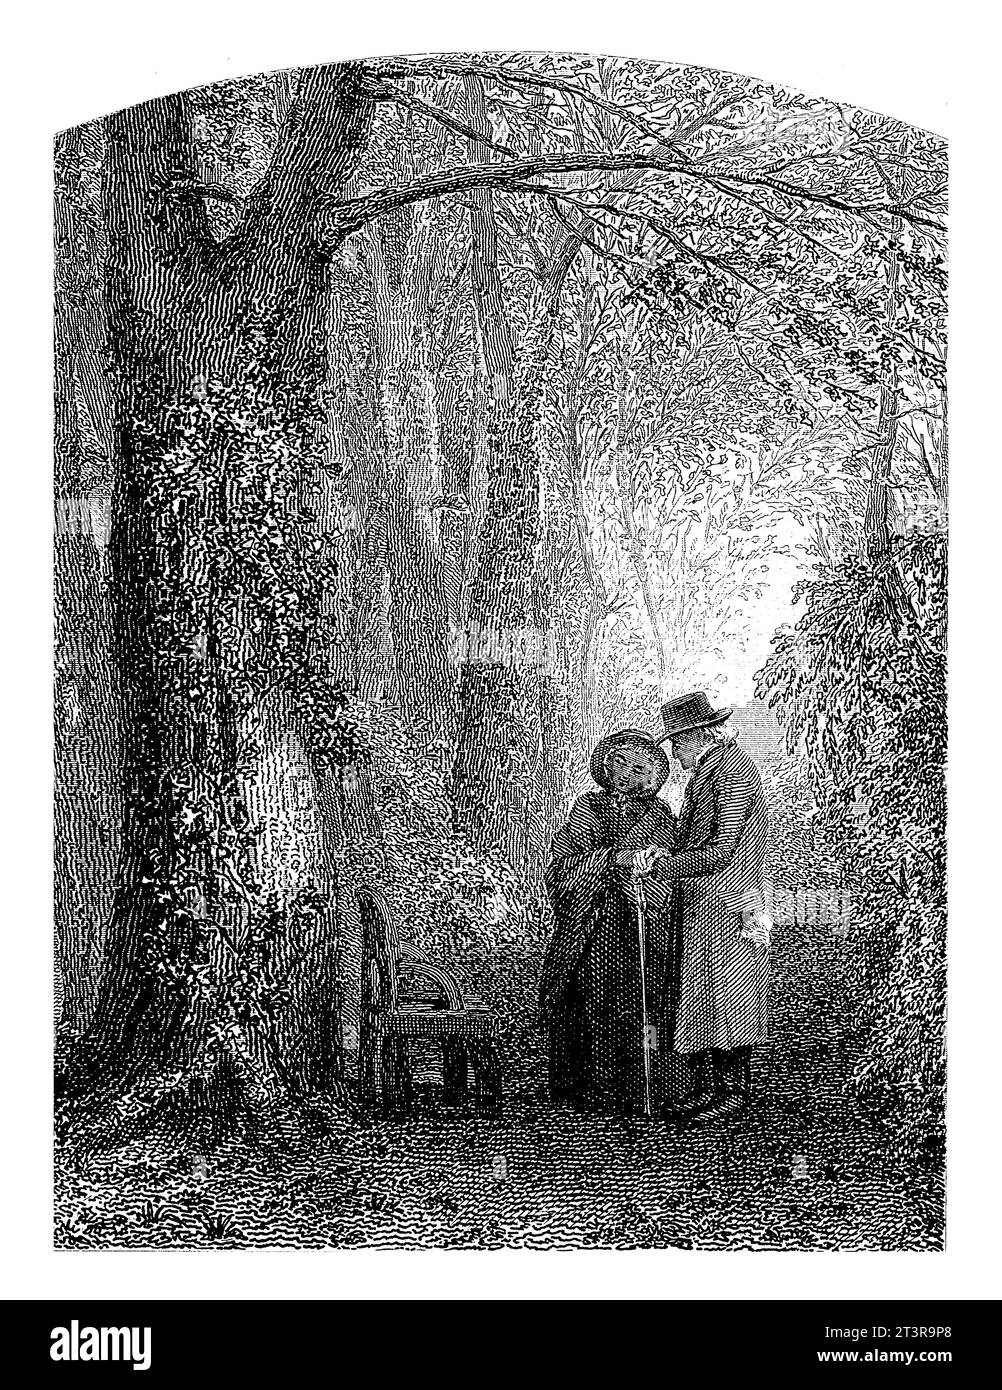 Elderly couple in a forest, Willem Frederik Wehmeyer, after Charles Rochussen, 1834 - 1854 In a forest stands an elderly couple with a stick. Stock Photo